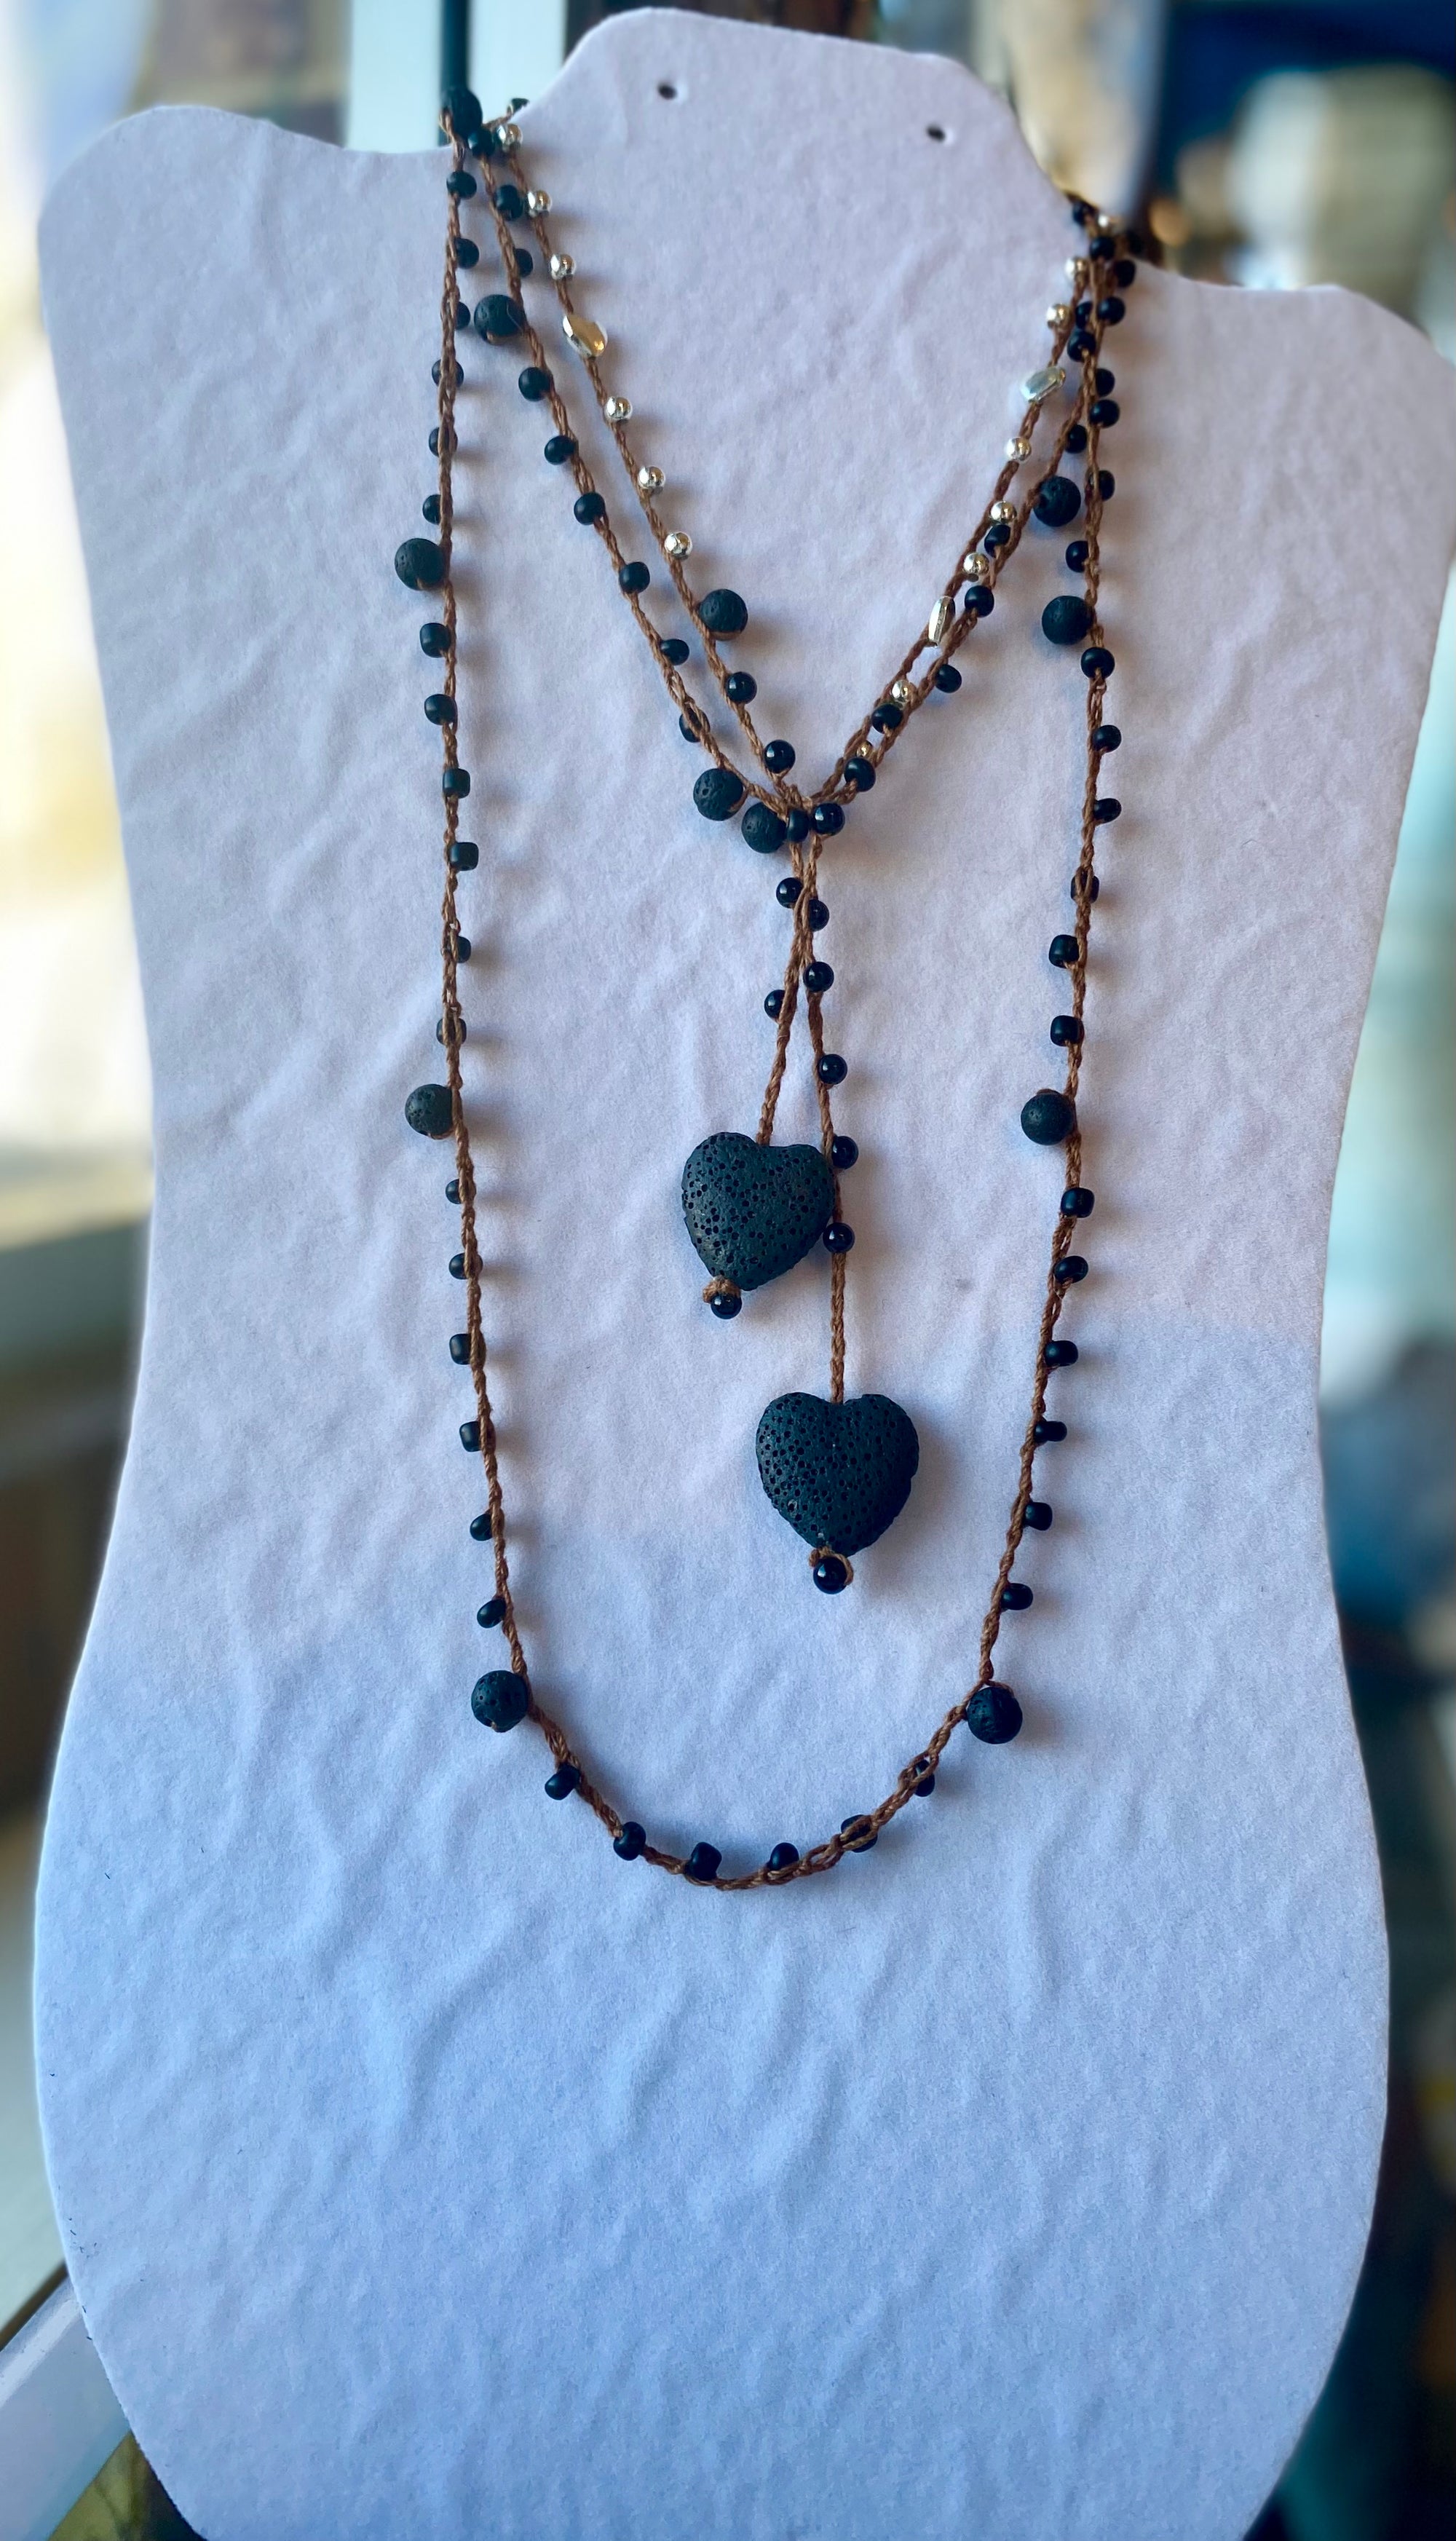 Wooden Rope Lava Bead Lariat Necklace